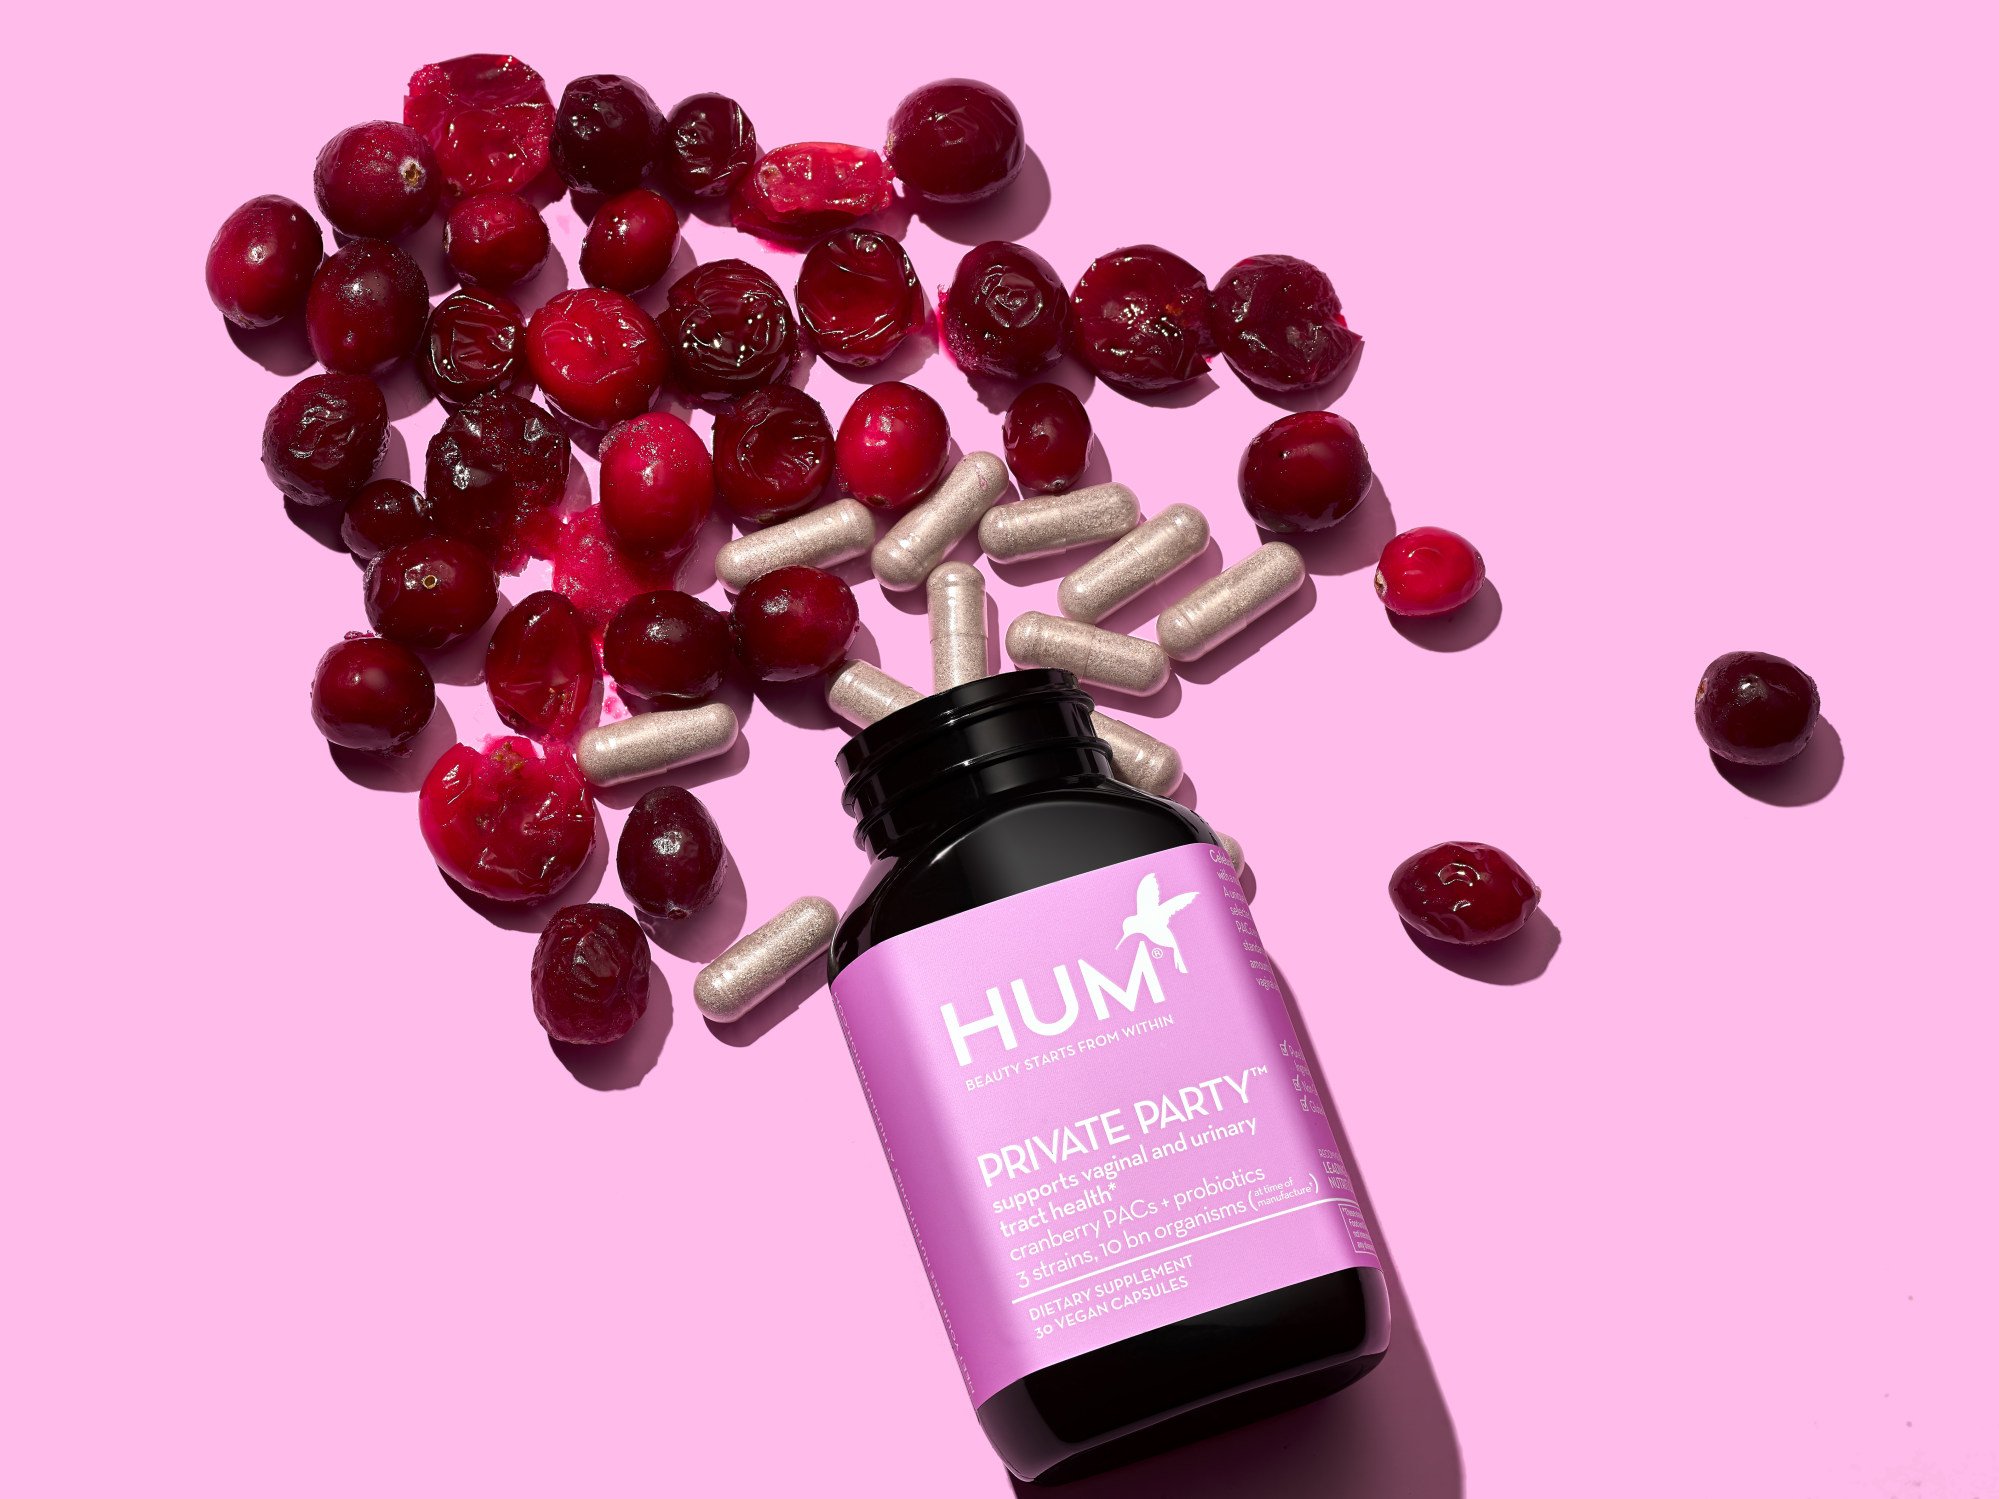 0c101789 8fda 4dbe 852d 460bea78f42e eb837845 - take the red pill?  How health supplements became an Instagram and TikTok trend: Boutique brands we call nutrition and tally health promise high-tech wellness and beauty kicks in funky-colored capsules